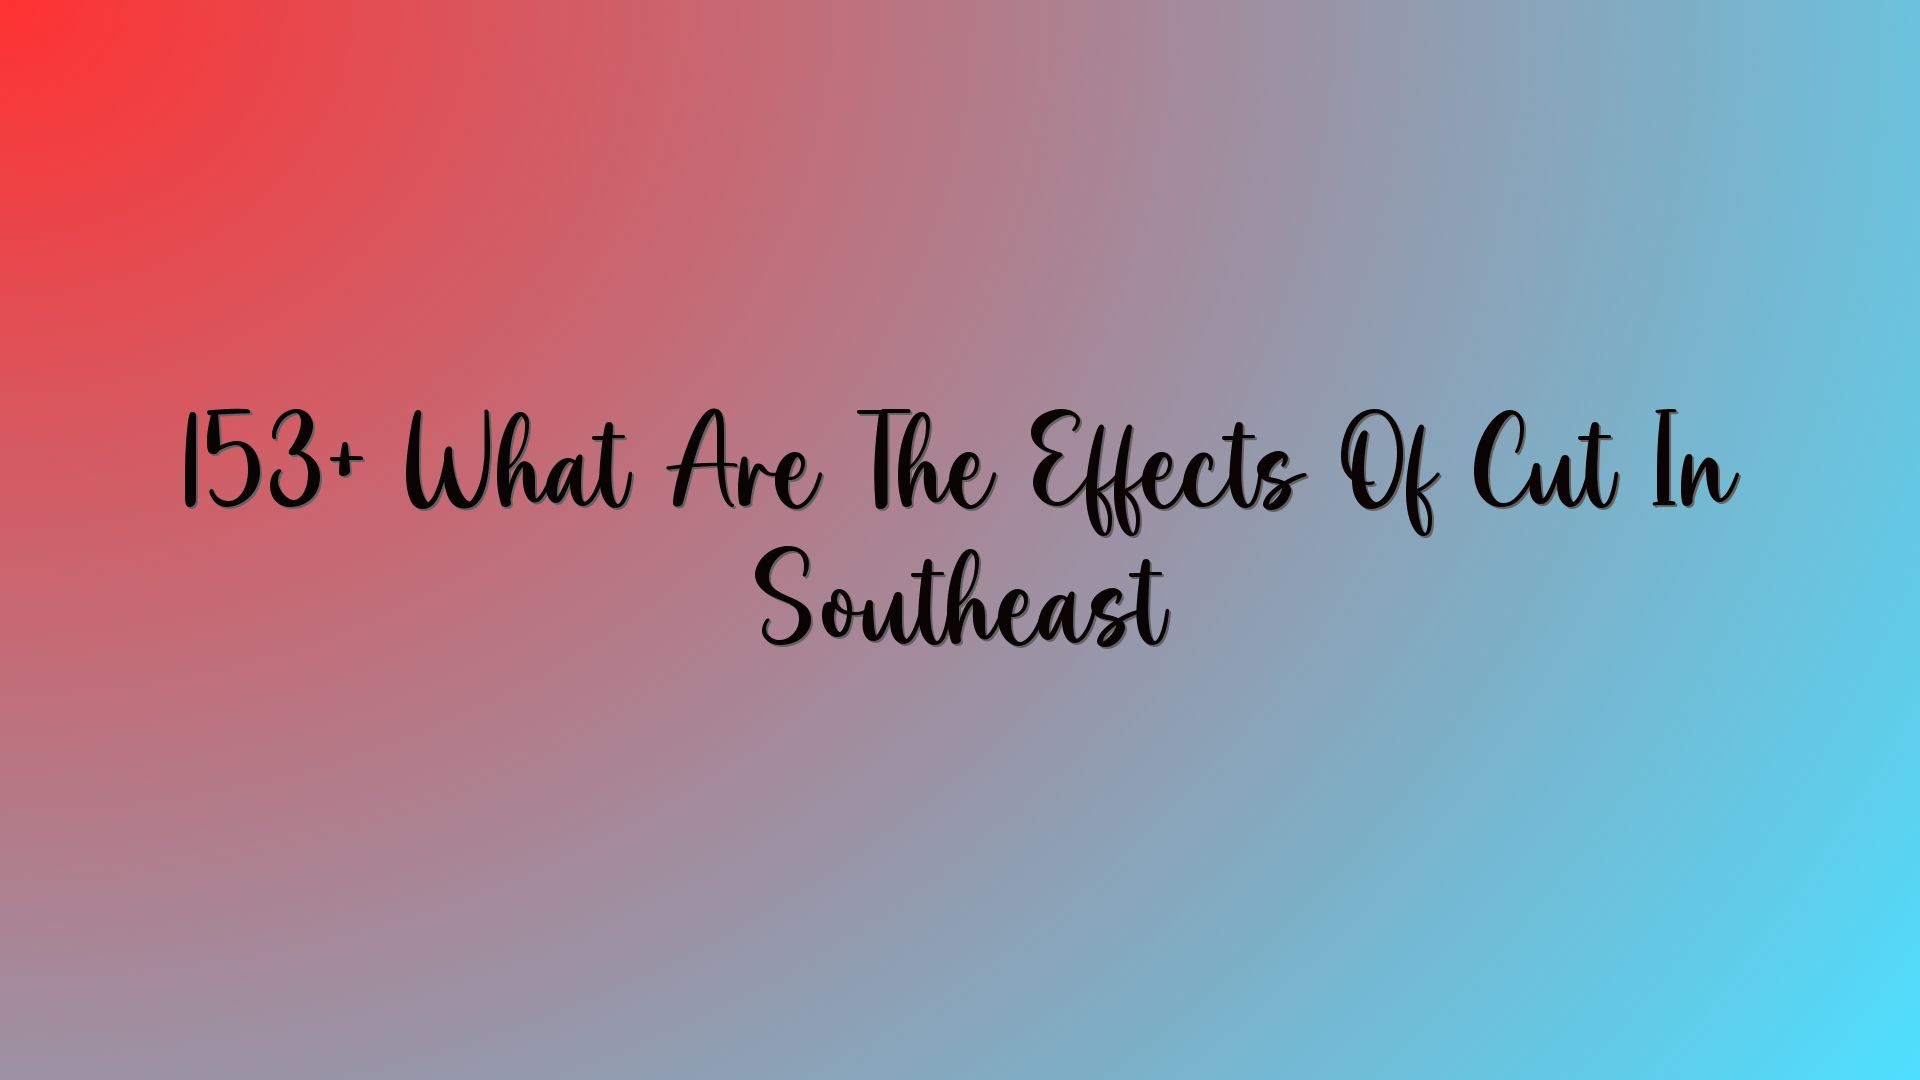 153+ What Are The Effects Of Cut In Southeast